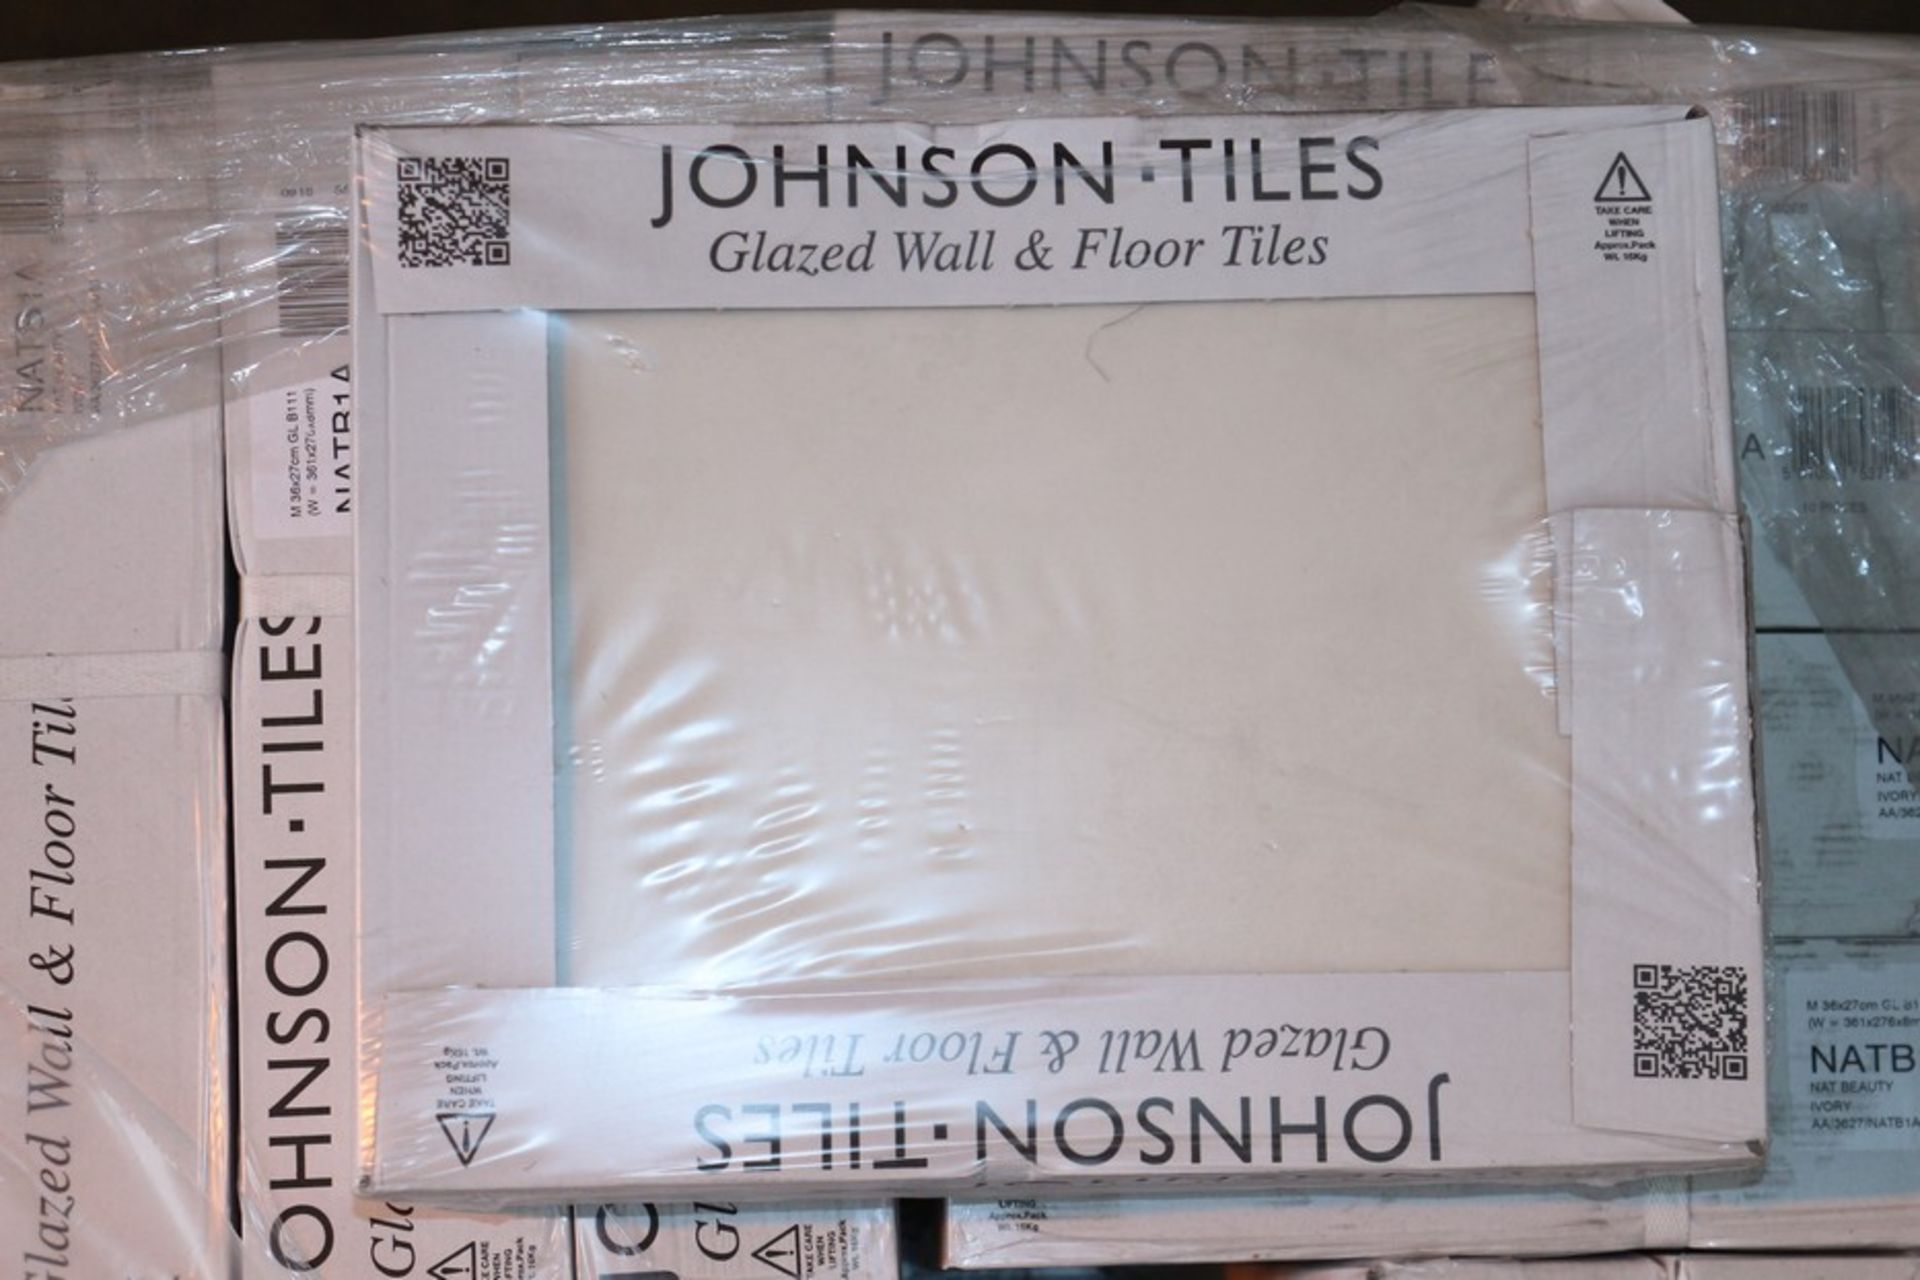 48X FACTORY SEALED BY JOHNSON TILES GLAZED WALL AND FLOOR TILES 360 X 270MM RRP £19.99 PER PACK - Image 2 of 3